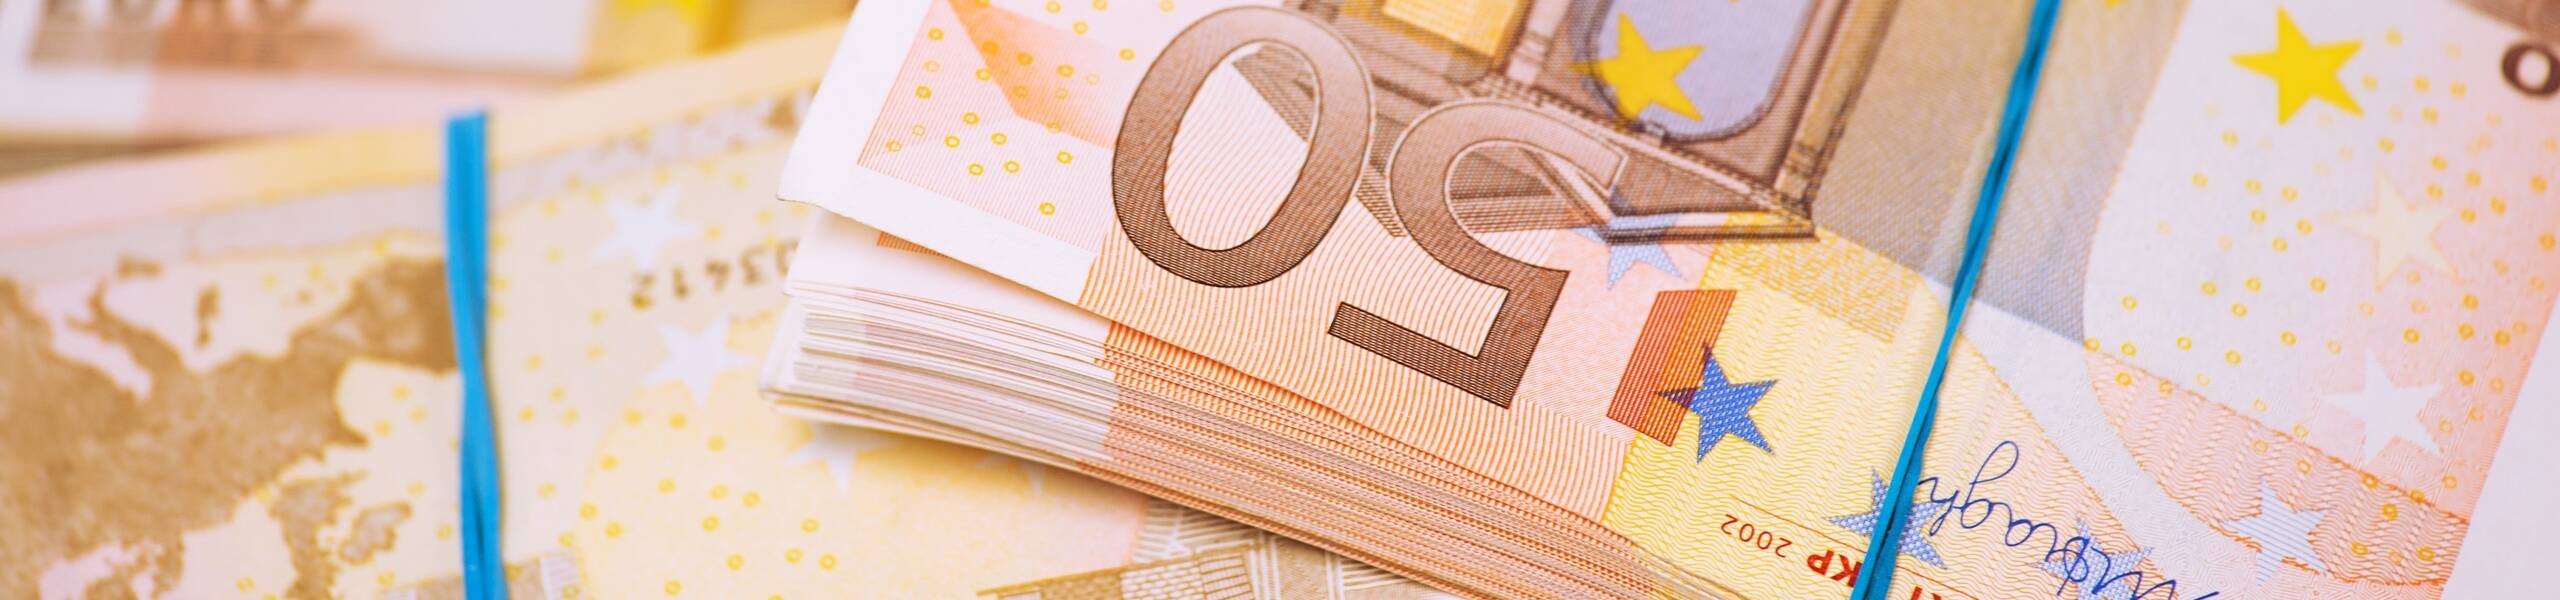 EUR/USD: 'Tower' pushed pair higher